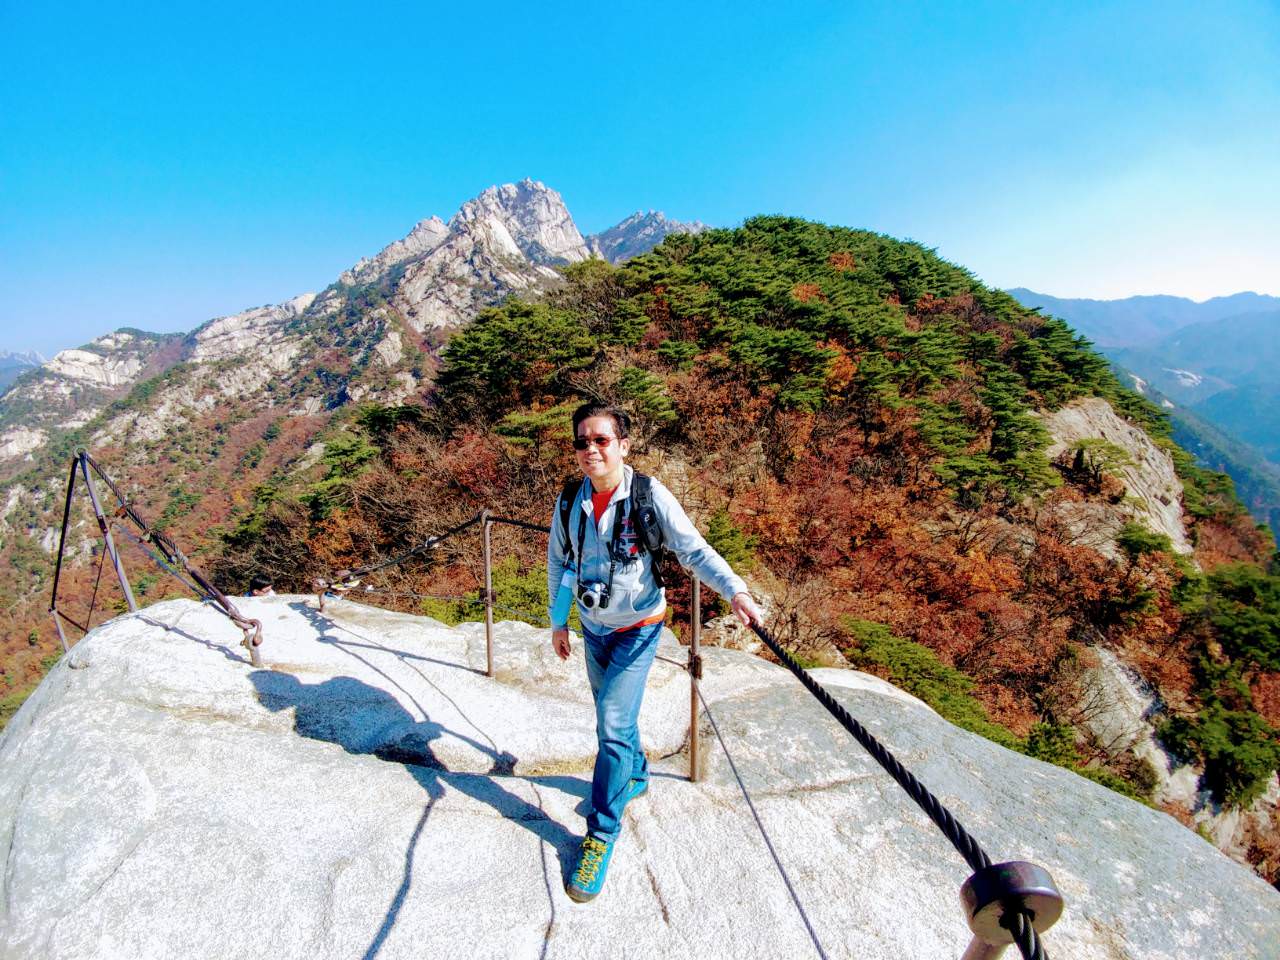 Wonhyobong Peak is a nice mountain belonging to Bukhansan National Park, Seoul. Getting there is pretty easy and the elevation is challenging enough for able-bodied individuals. At the summit, you have an amazing panoramic view of Seoul and the surrounding areas.